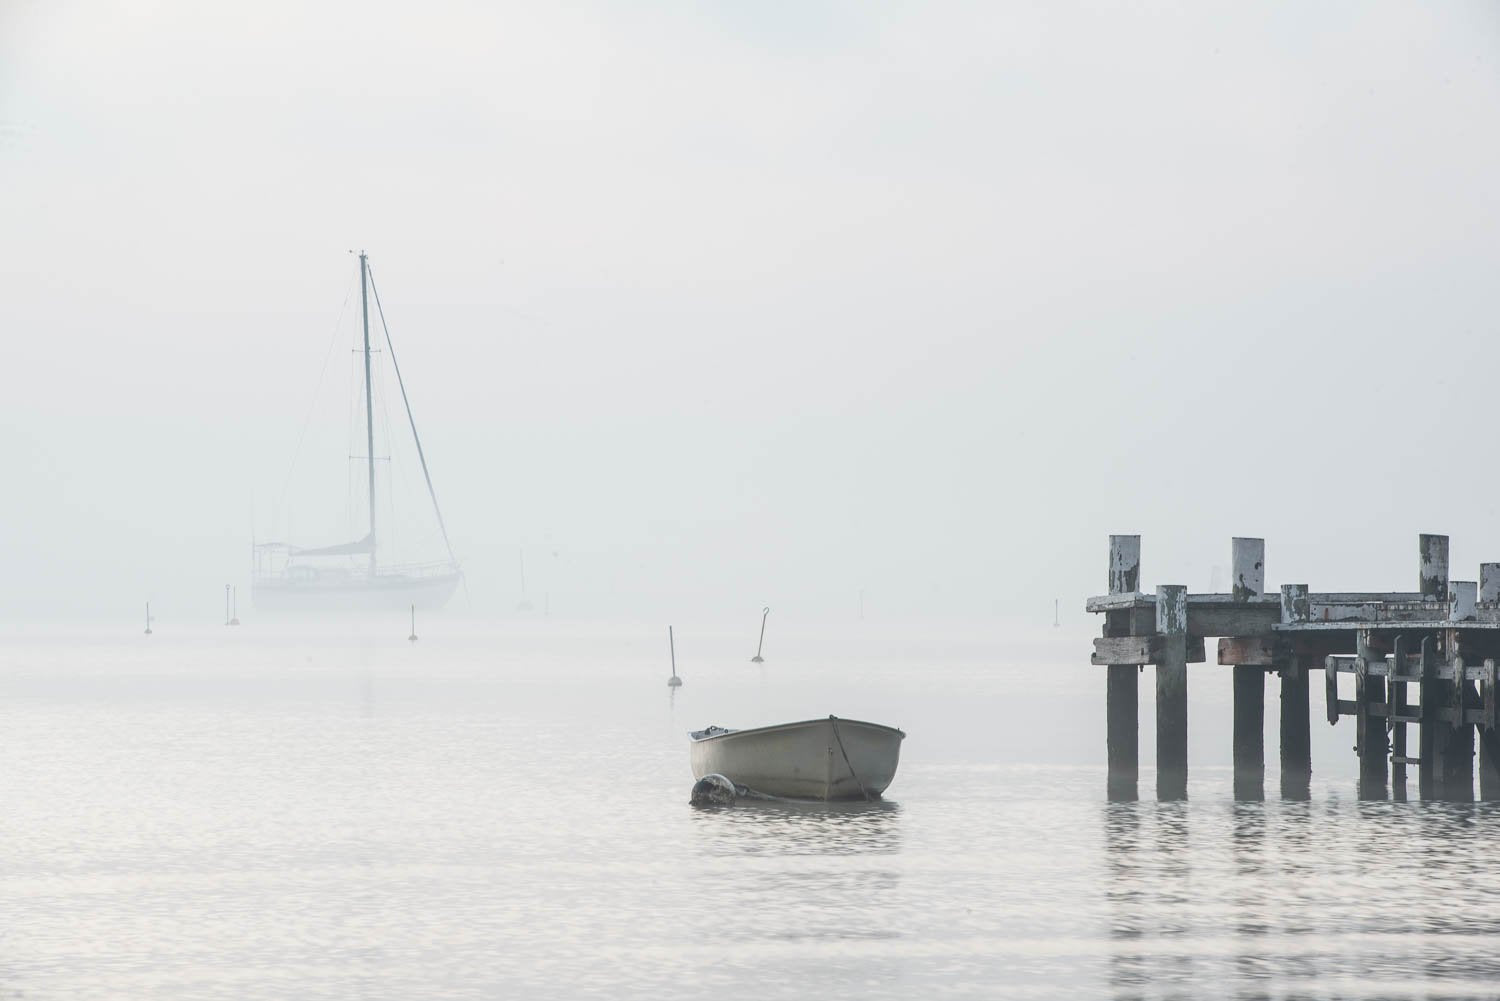 A floating boat and a wooden bridge in the lake, Morning Mist, Sorrento - Mornington Peninsula